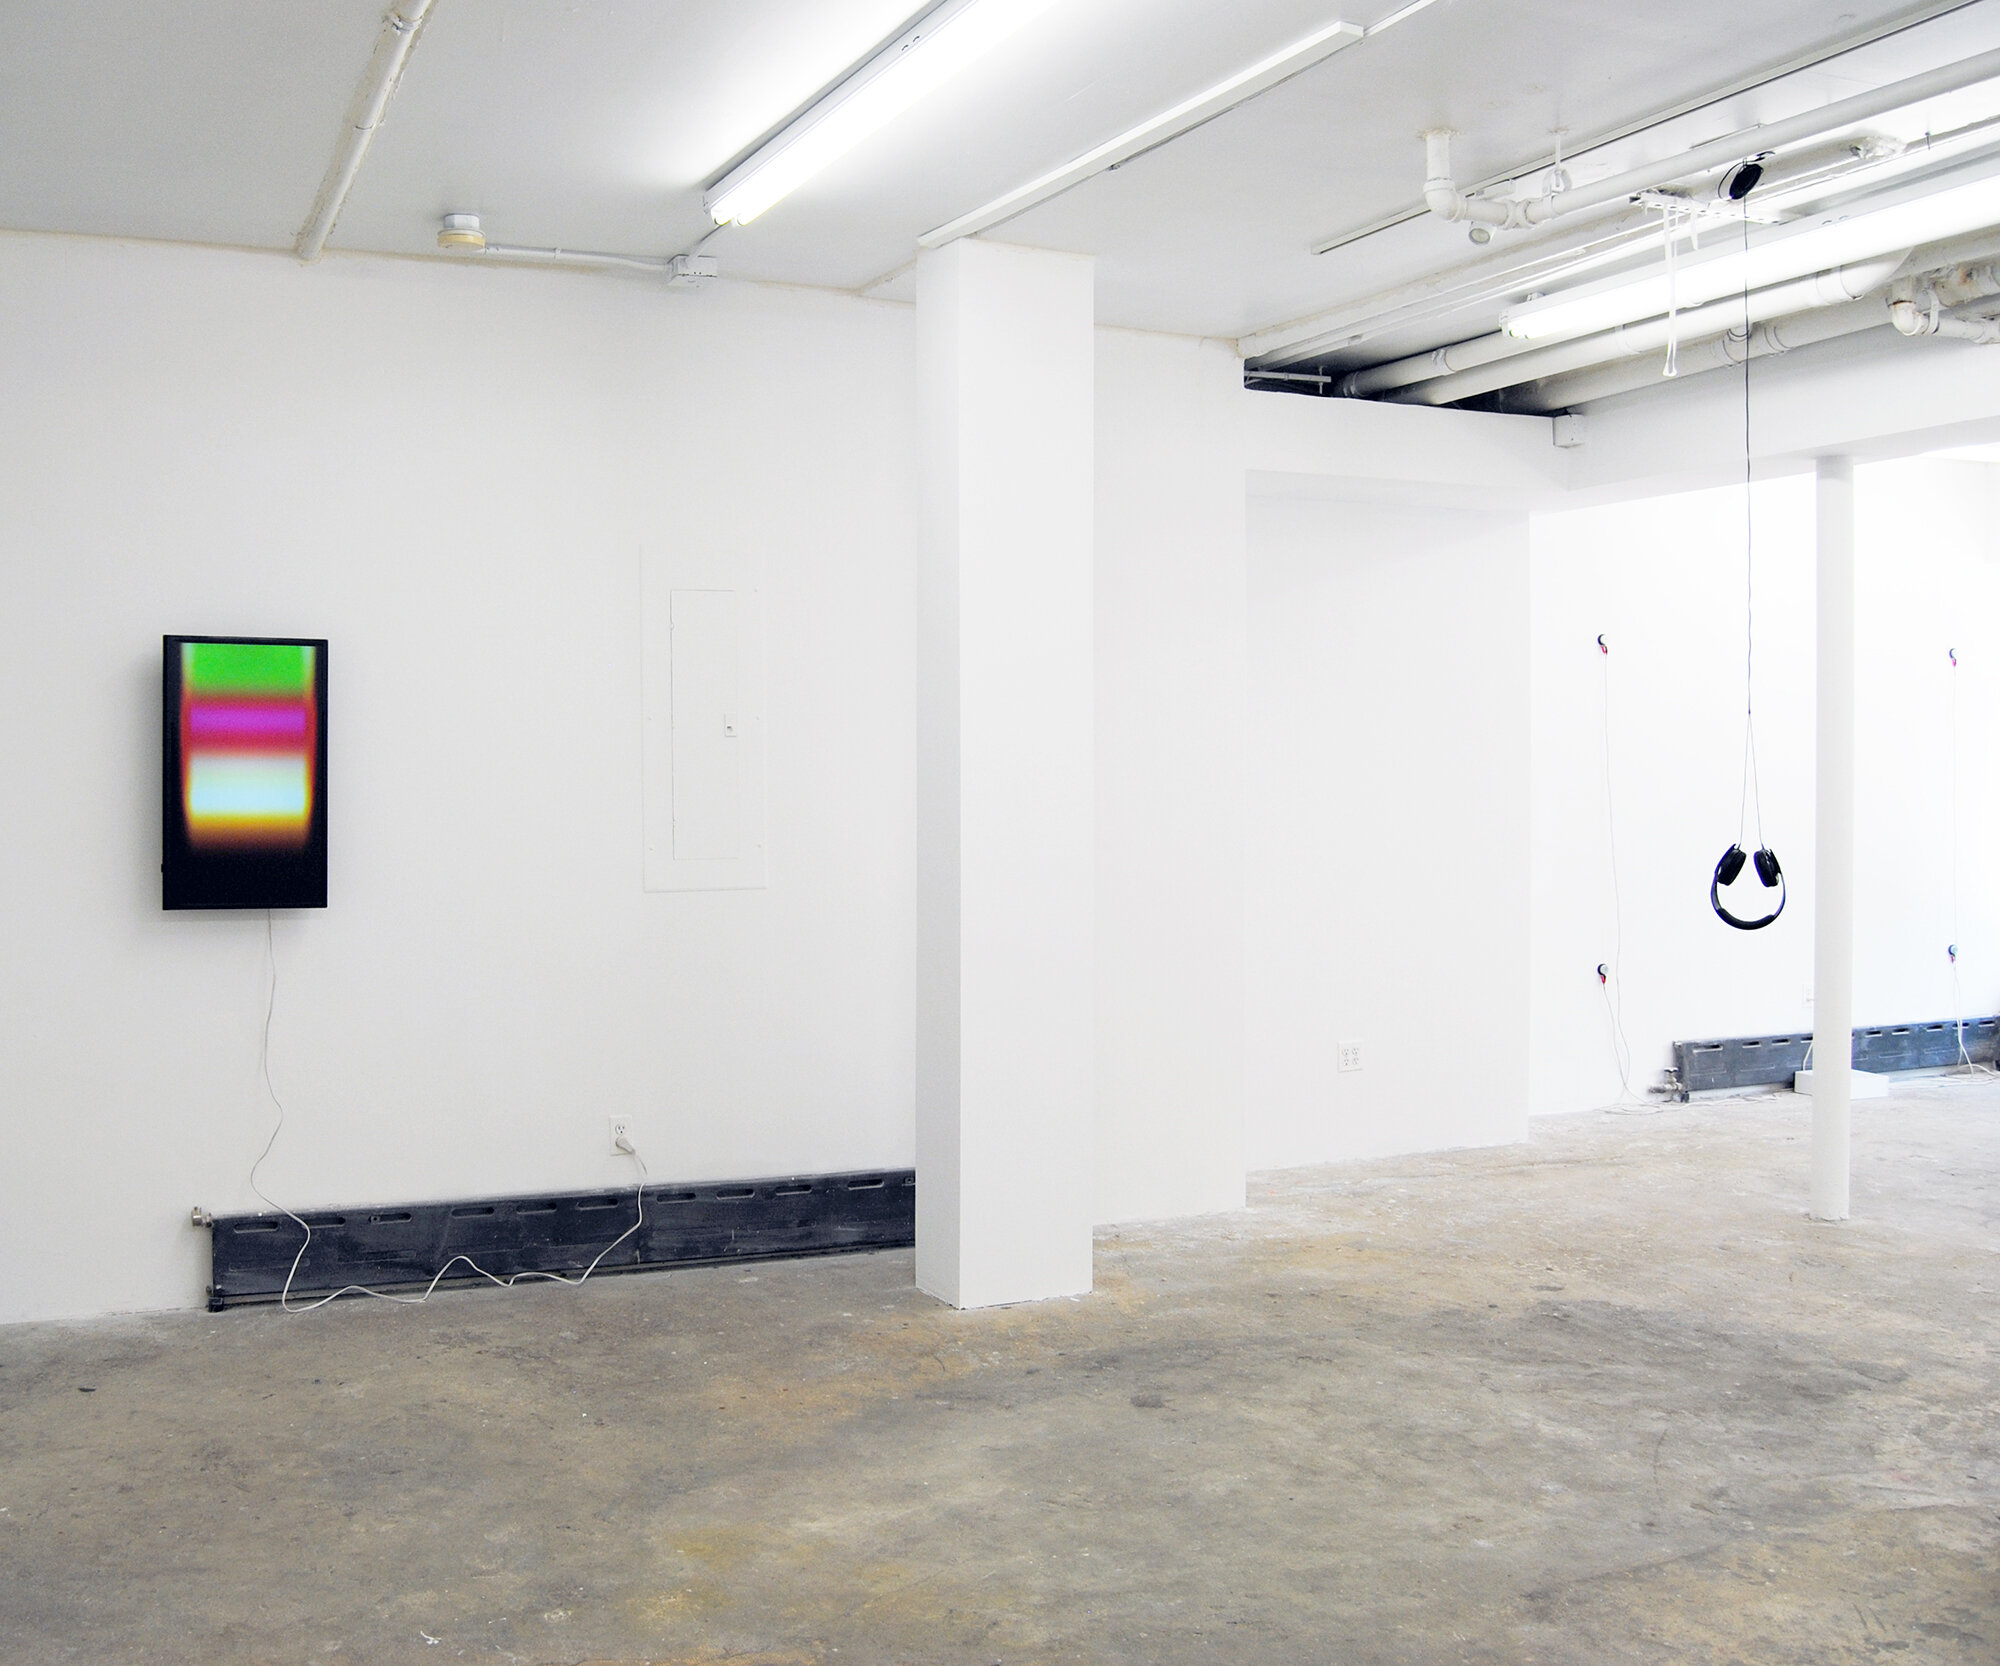 Installation image from the 2016 exhibition, SOUND I, featuring works by Richard Garet and Crystal Z. Campbell, at Cindy Rucker Gallery